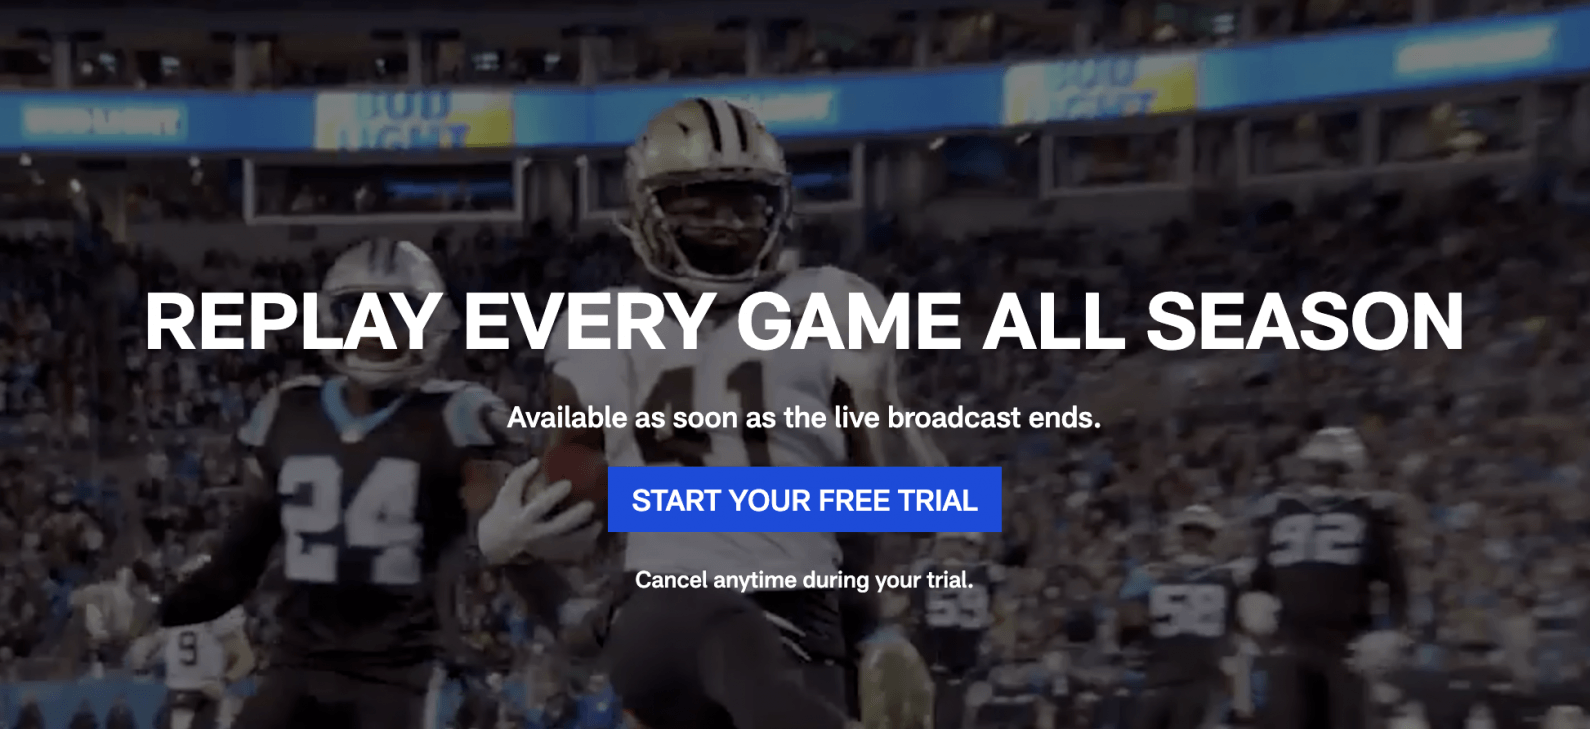 how much is nfl game pass per month